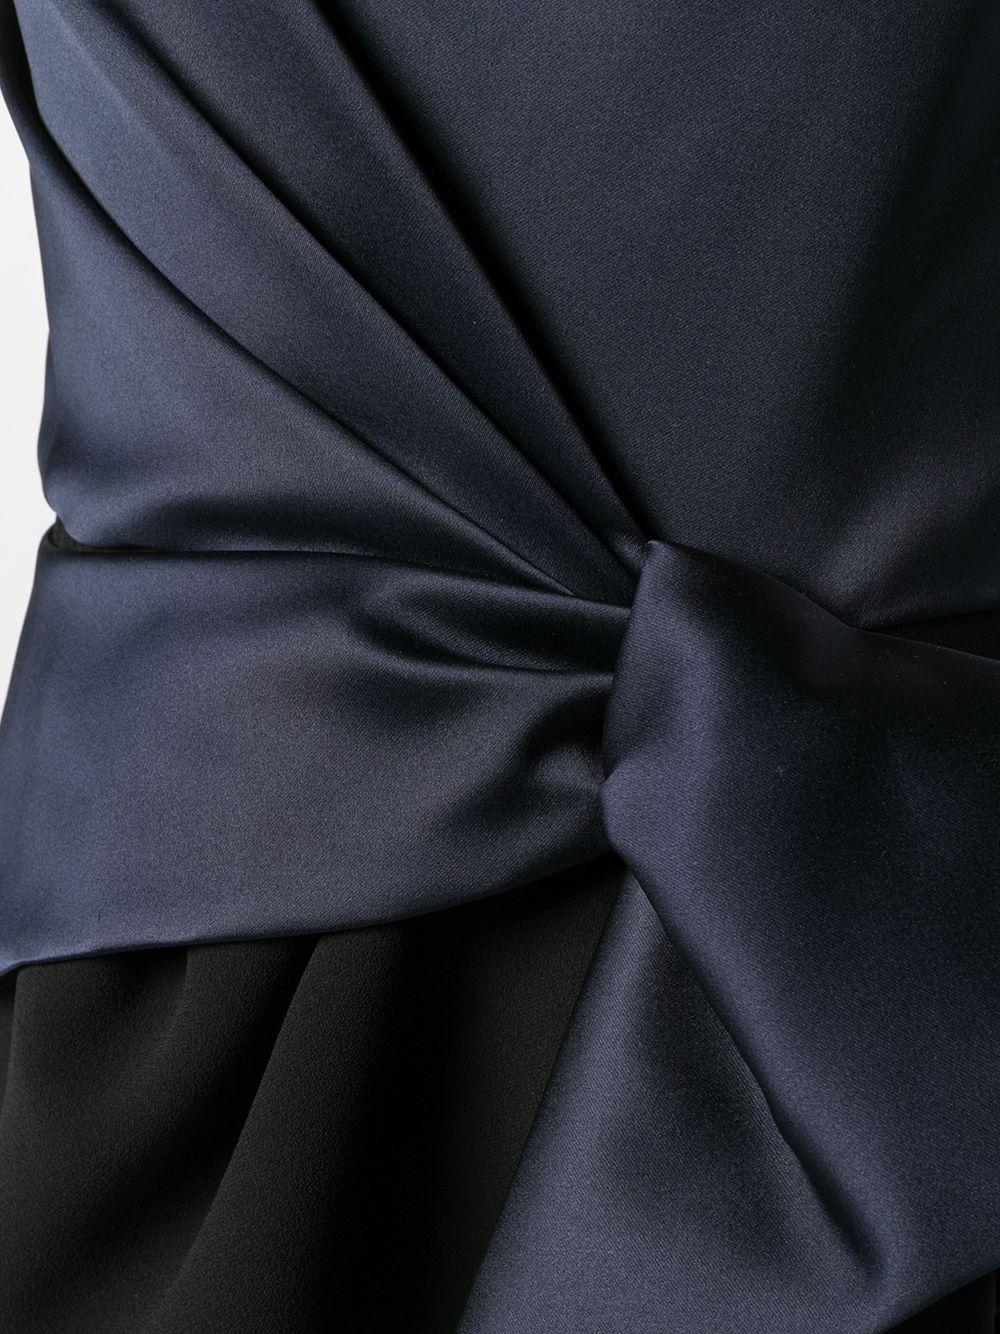 Crafted in France from an intricate blend of cotton and polyester, this pre-owned, couture gown from Balenciaga is expertly cut on the bias to reveal a fluid yet fitted silhouette and distinctive wrap style front. Showcasing a strapless navy bodice,